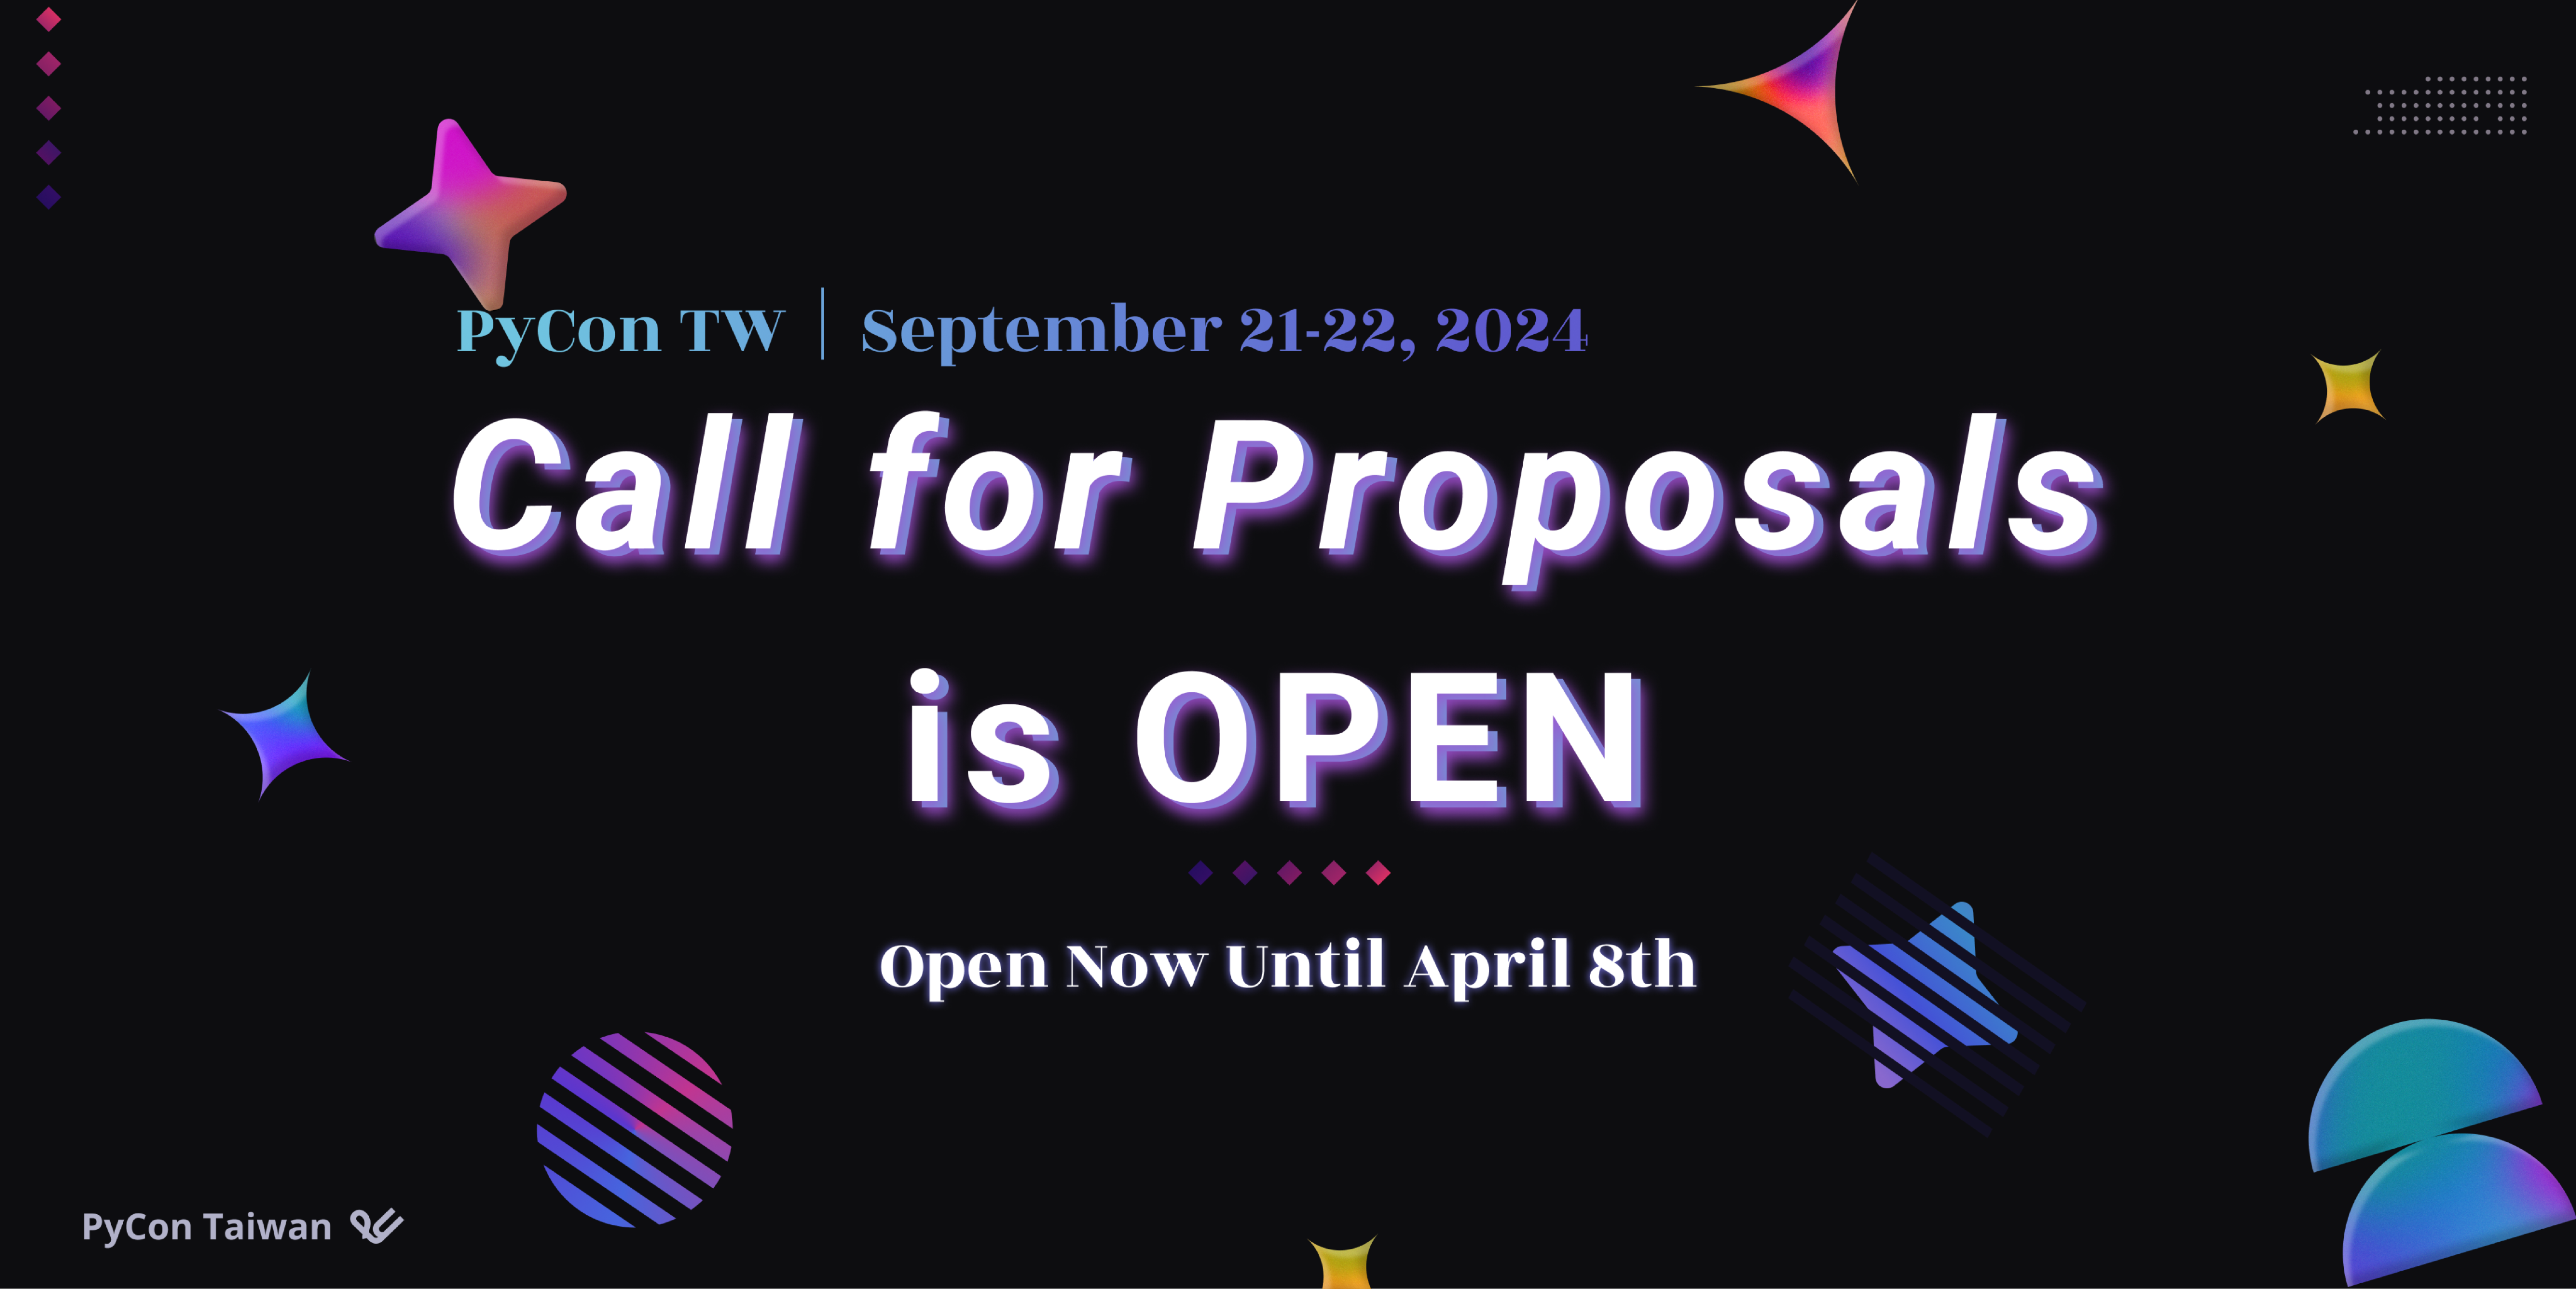 PyCon TW 2024 Call for Proposal